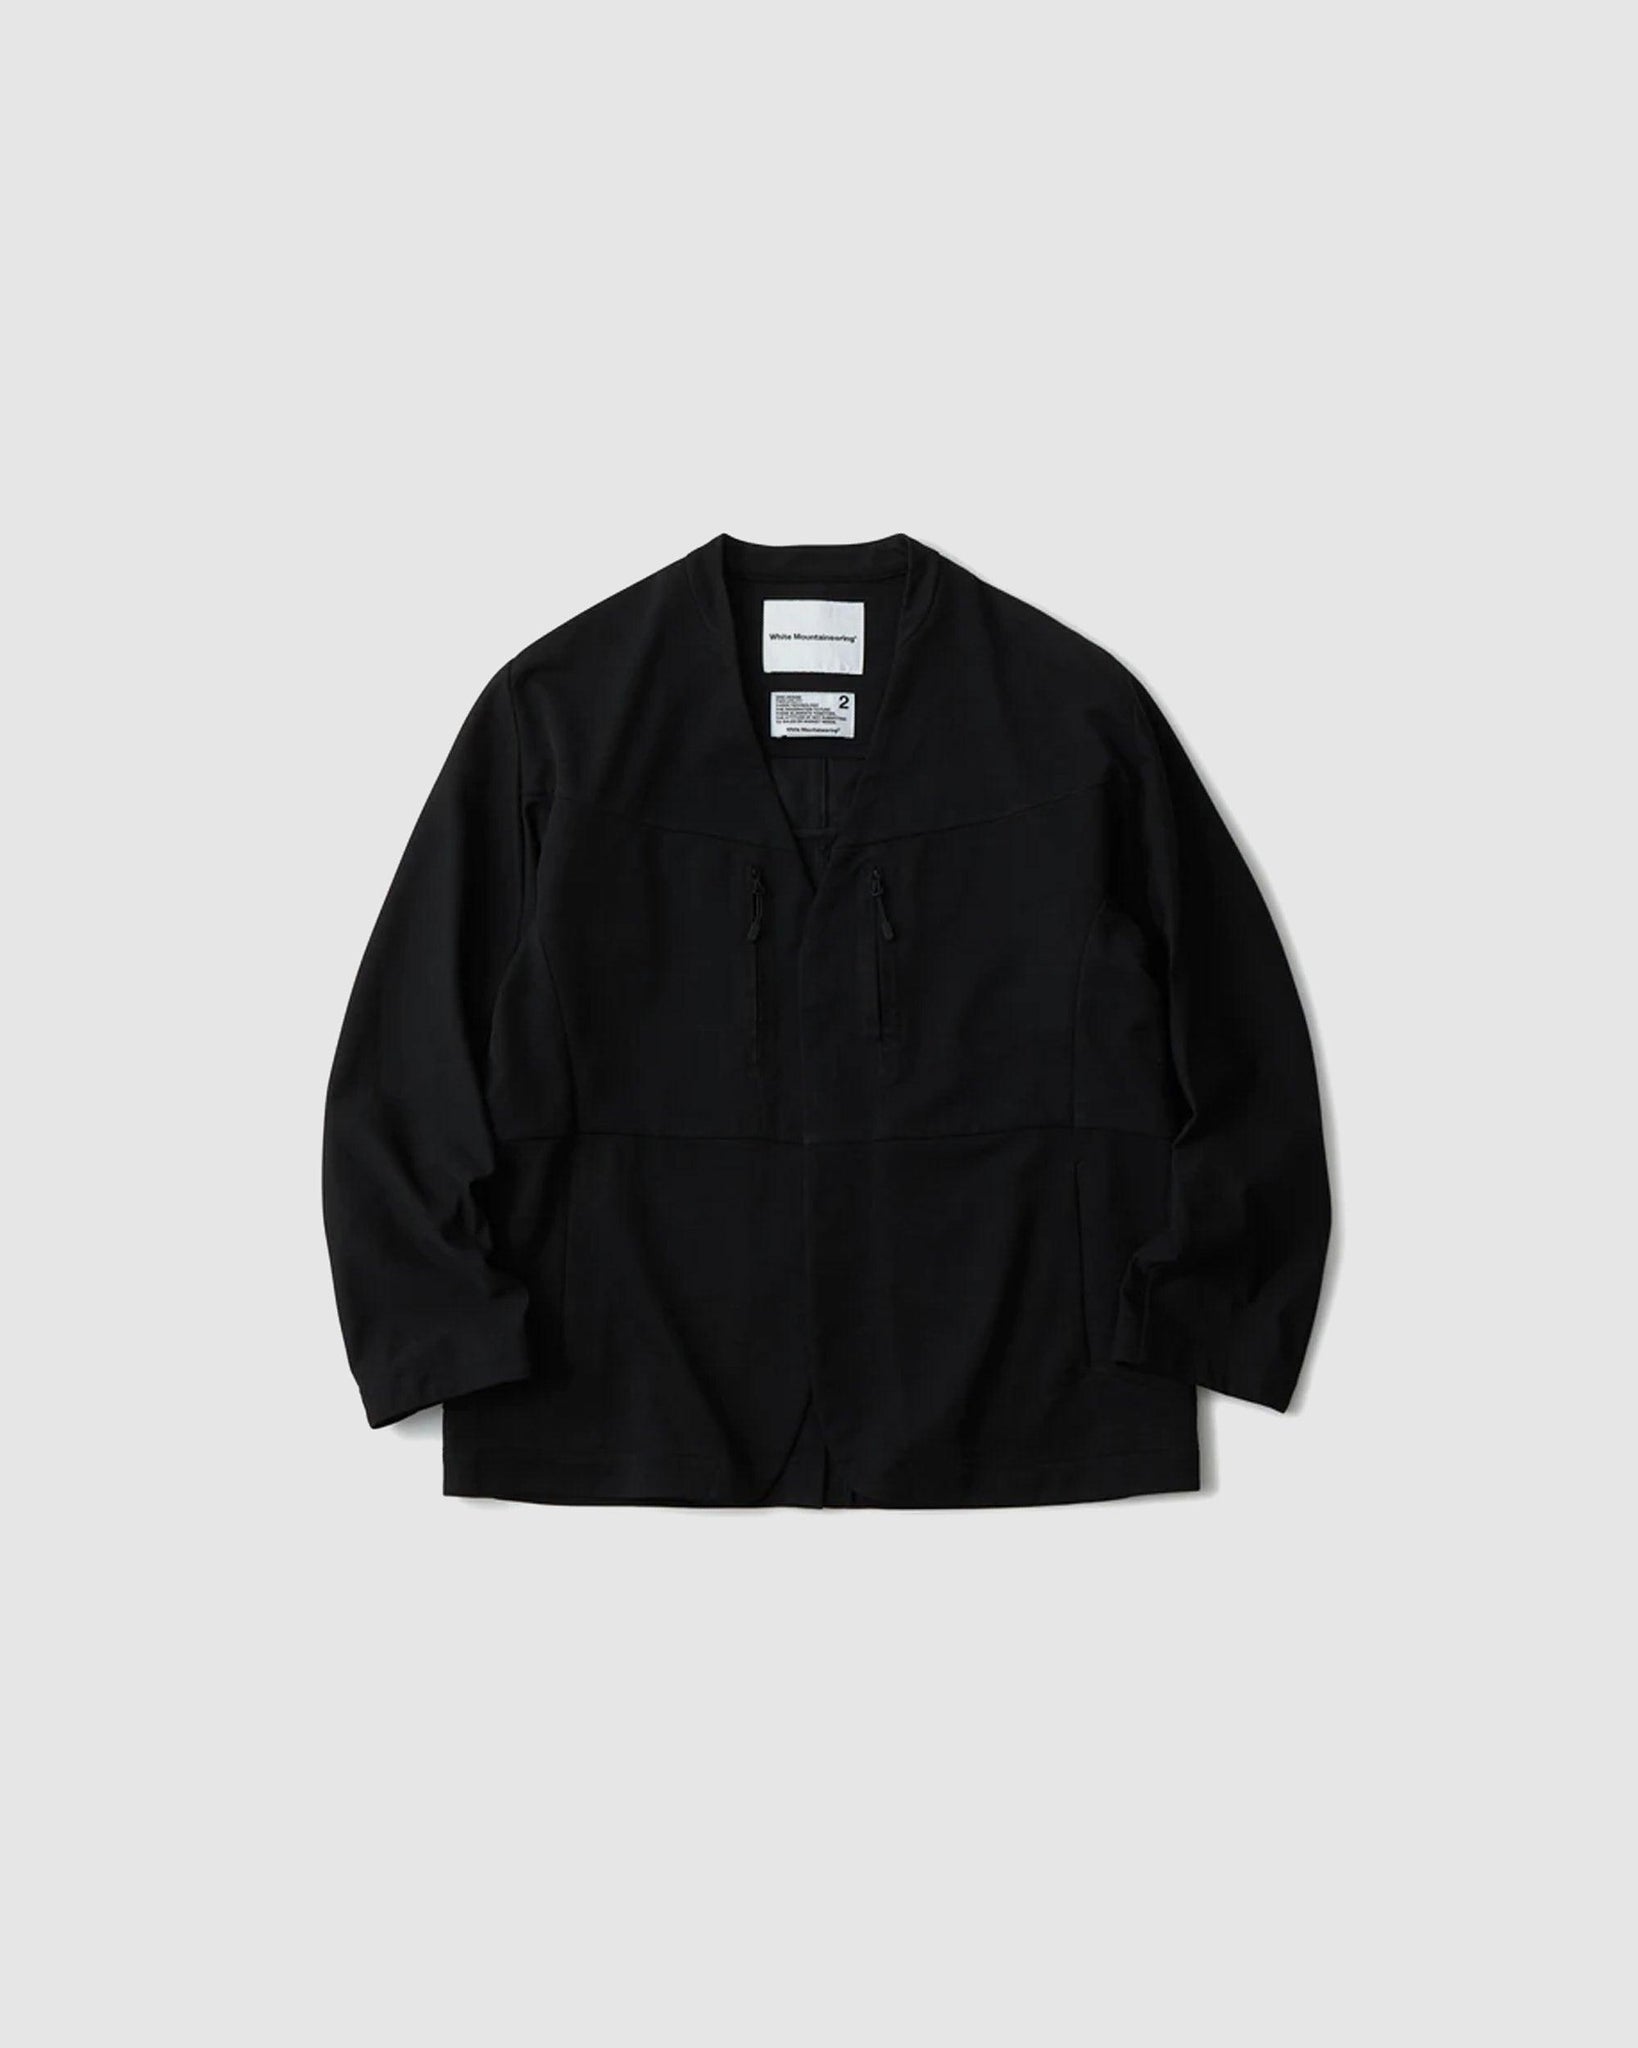 Panama Jersey Jacket - {{ collection.title }} - Chinatown Country Club 